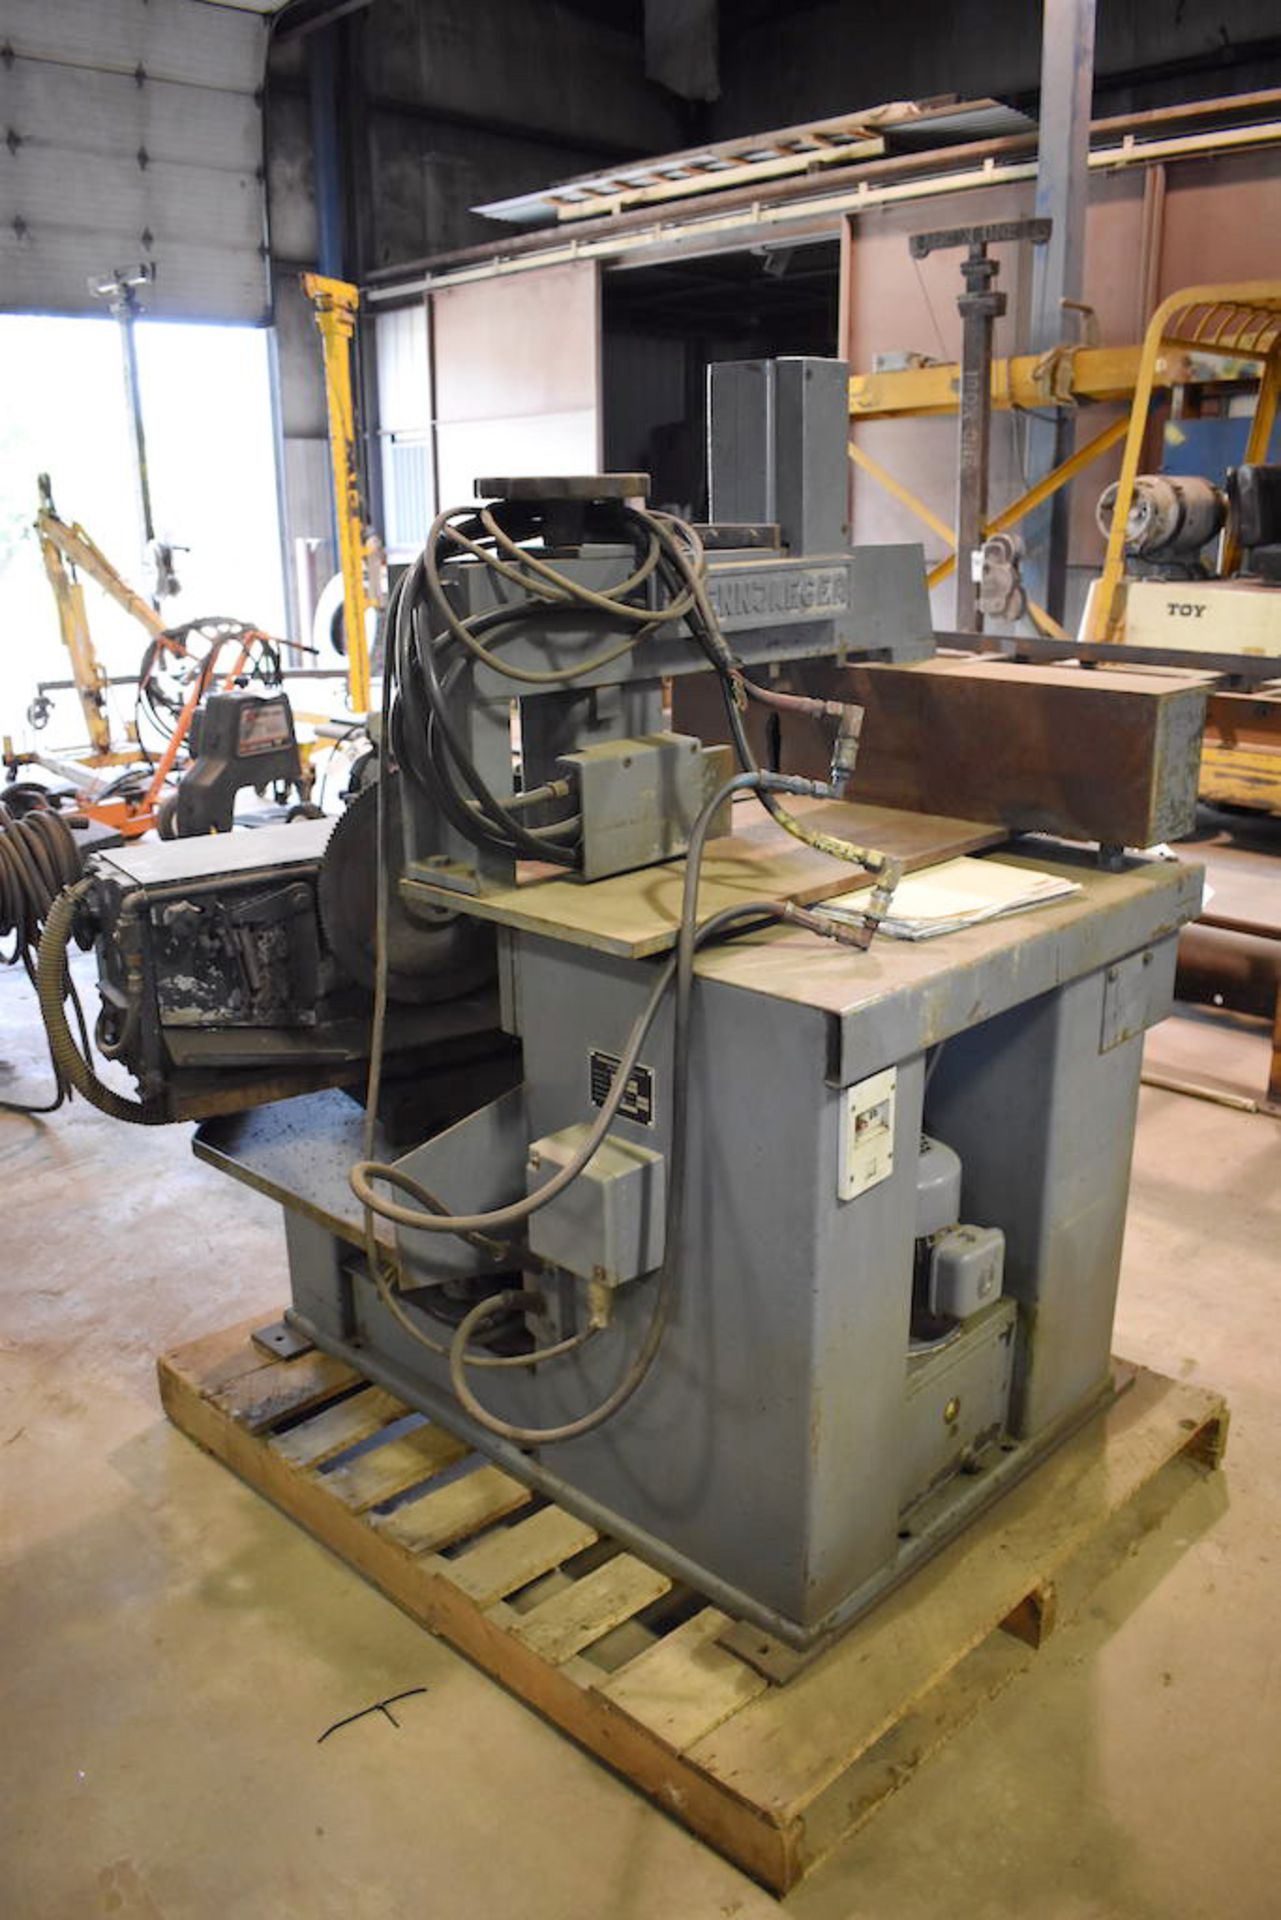 Cold Saw 14" Blade Tennjaeger Promecut LPC110 400 Auto. Mitre Cutting - Located In: Huntington Park, - Image 4 of 4